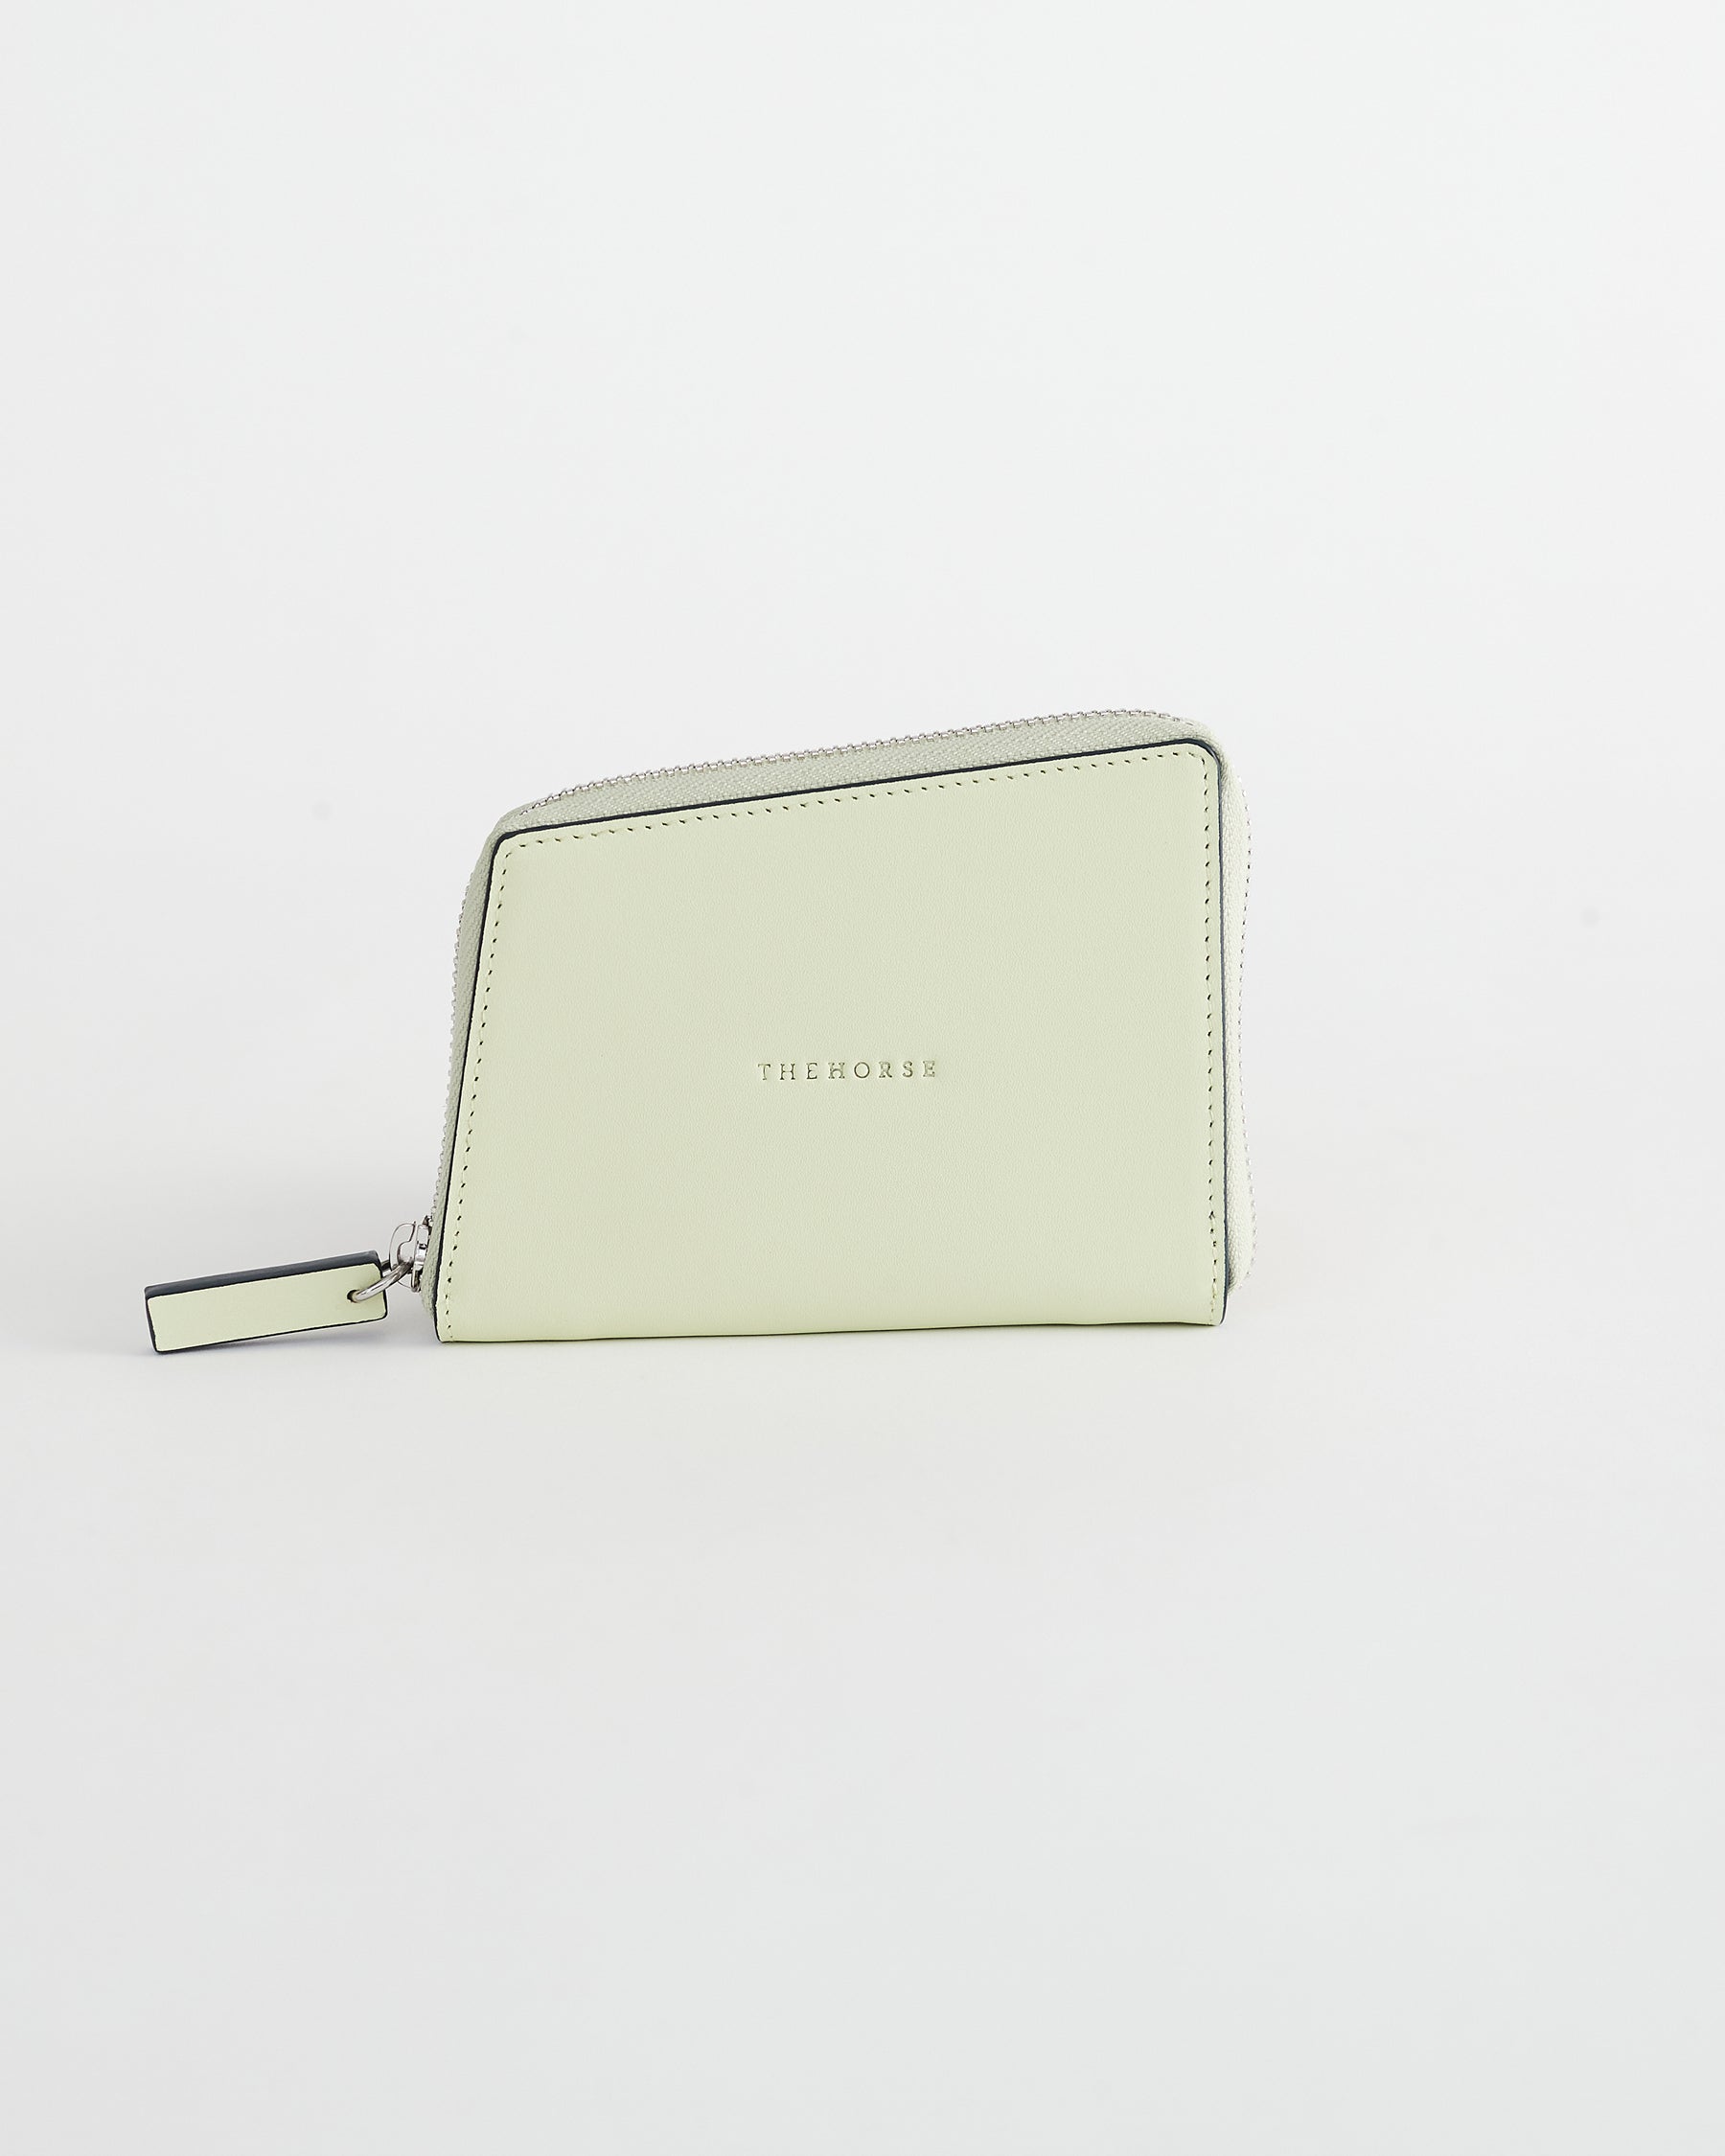 The Bo Women's Compact Leather Zip Wallet in Pistachio by The Horse®